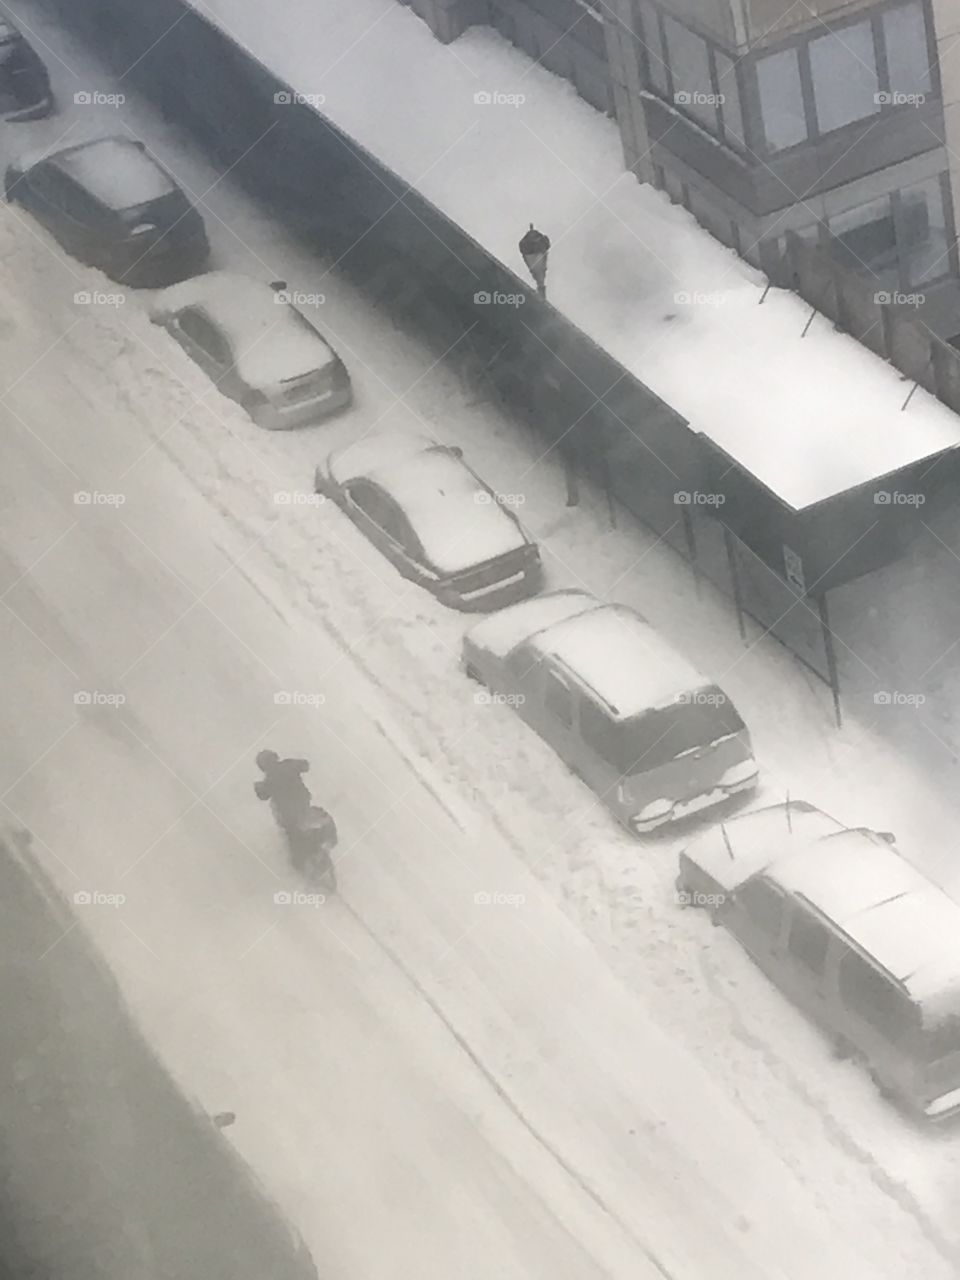 Snowstorm in NYC